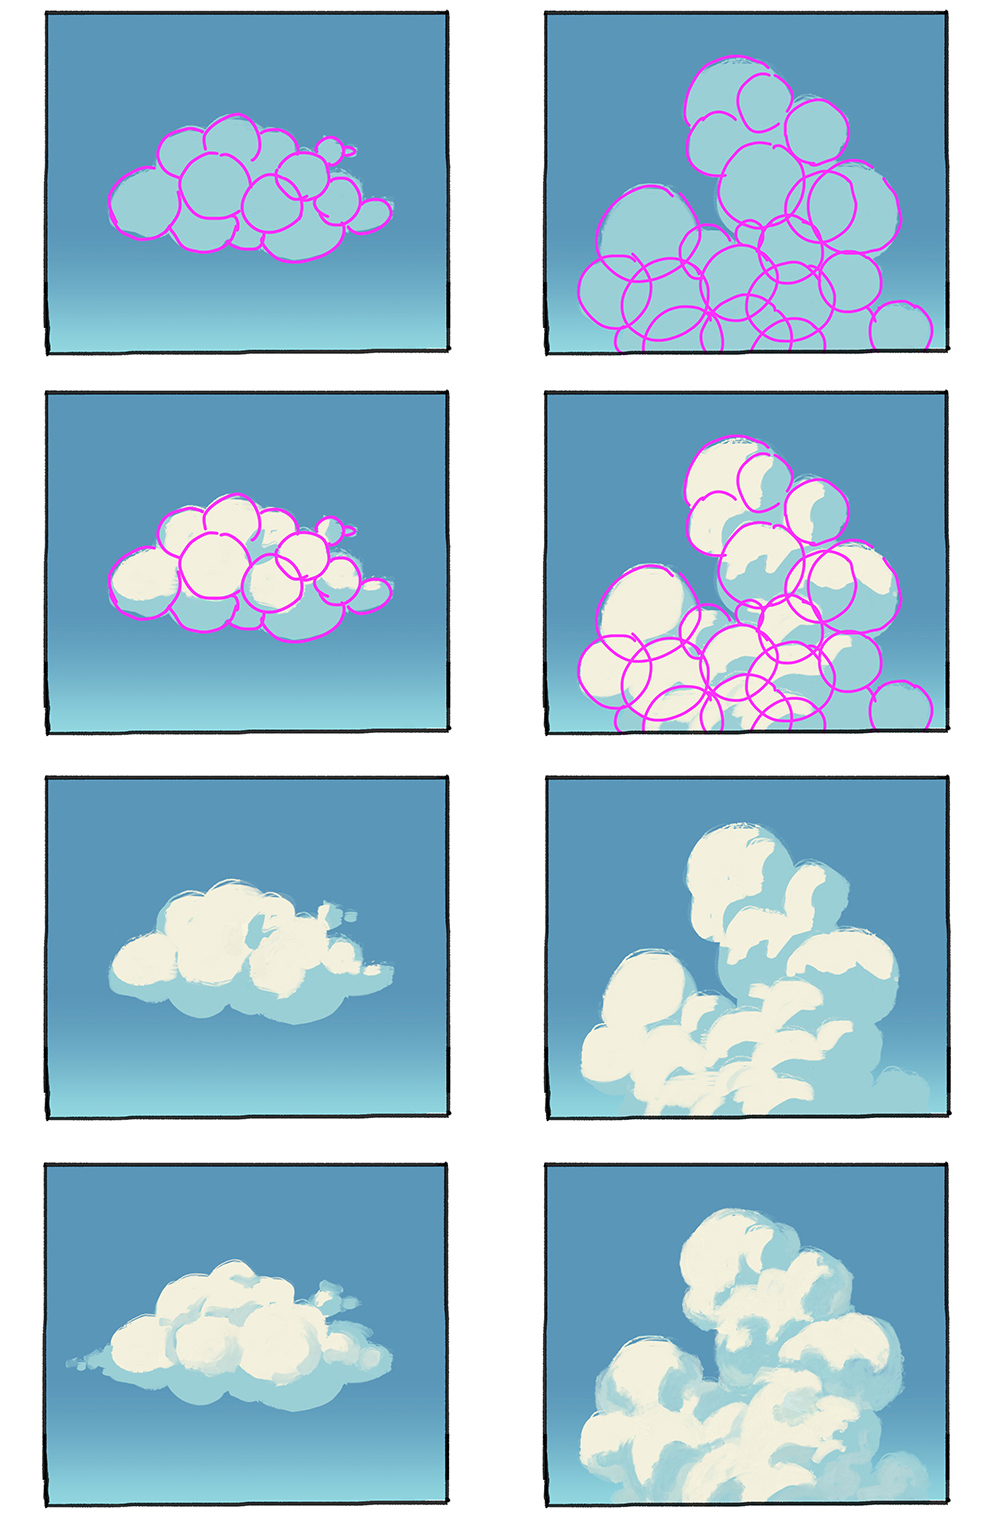 how to draw clouds